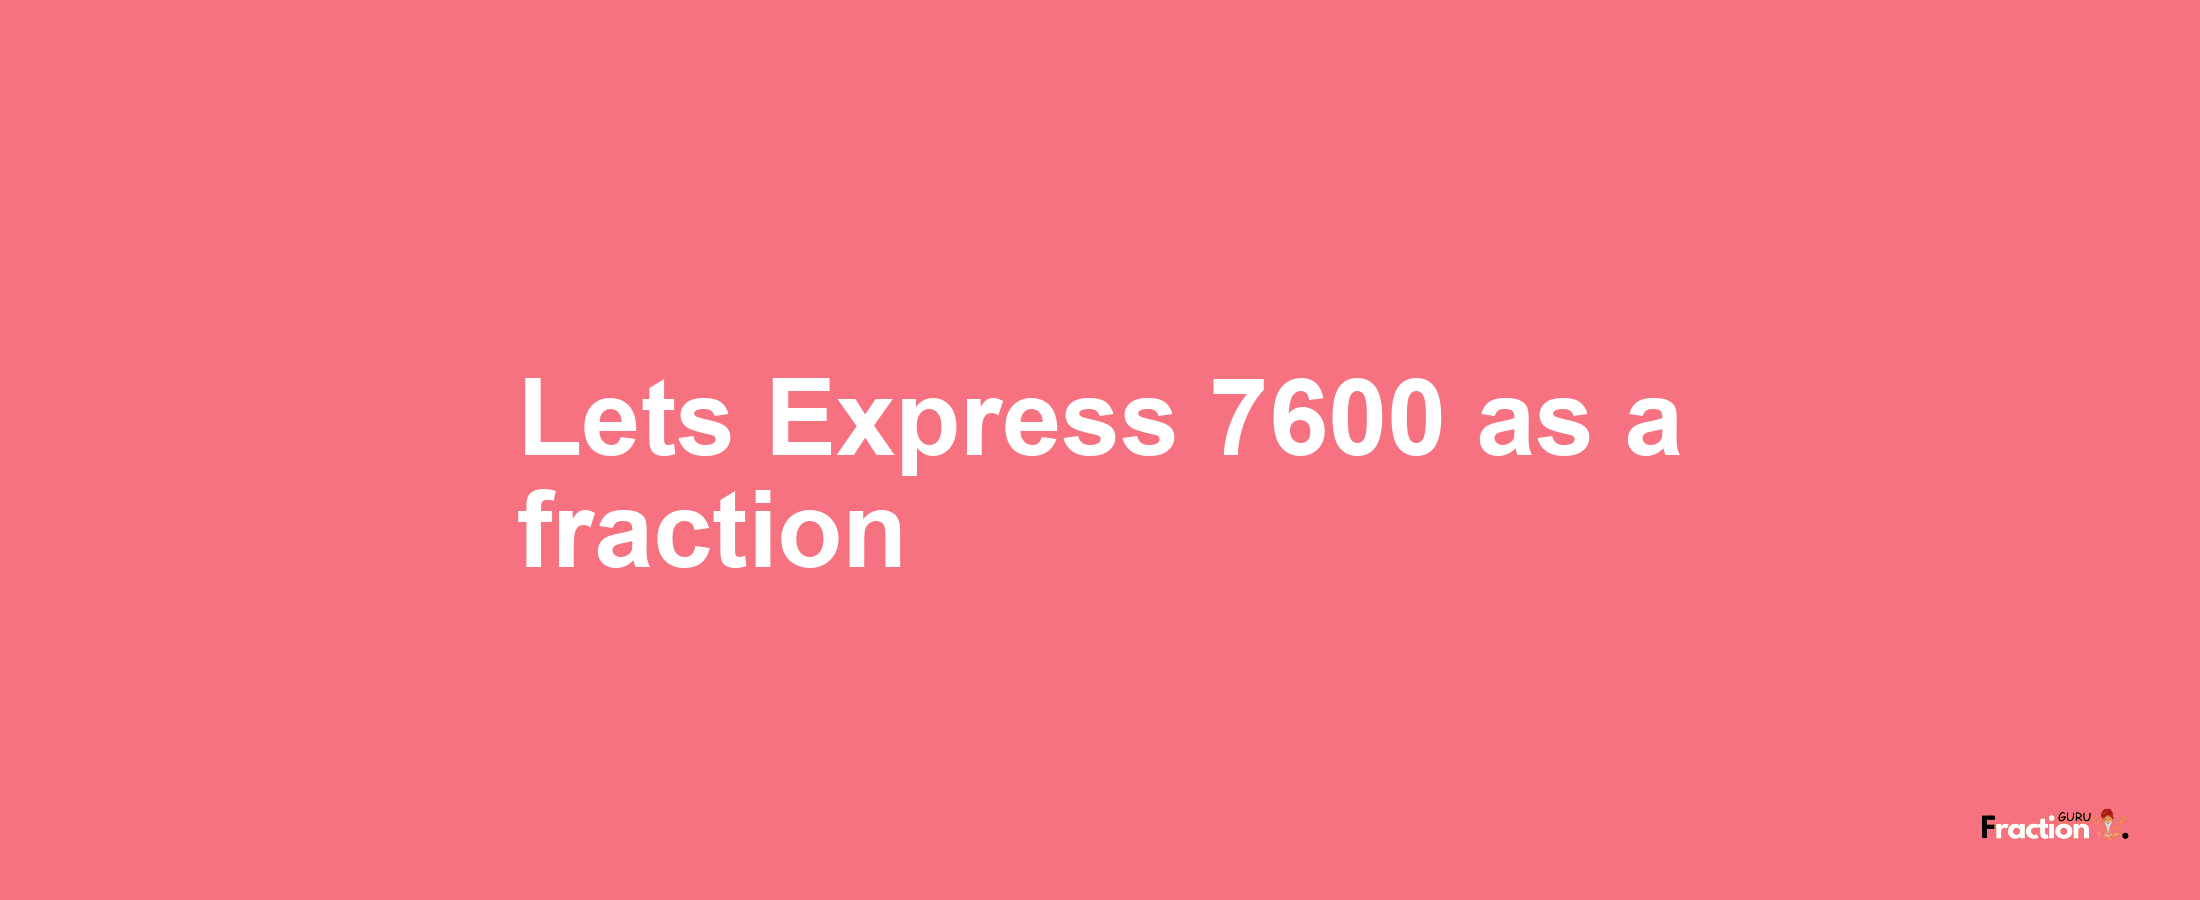 Lets Express 7600 as afraction